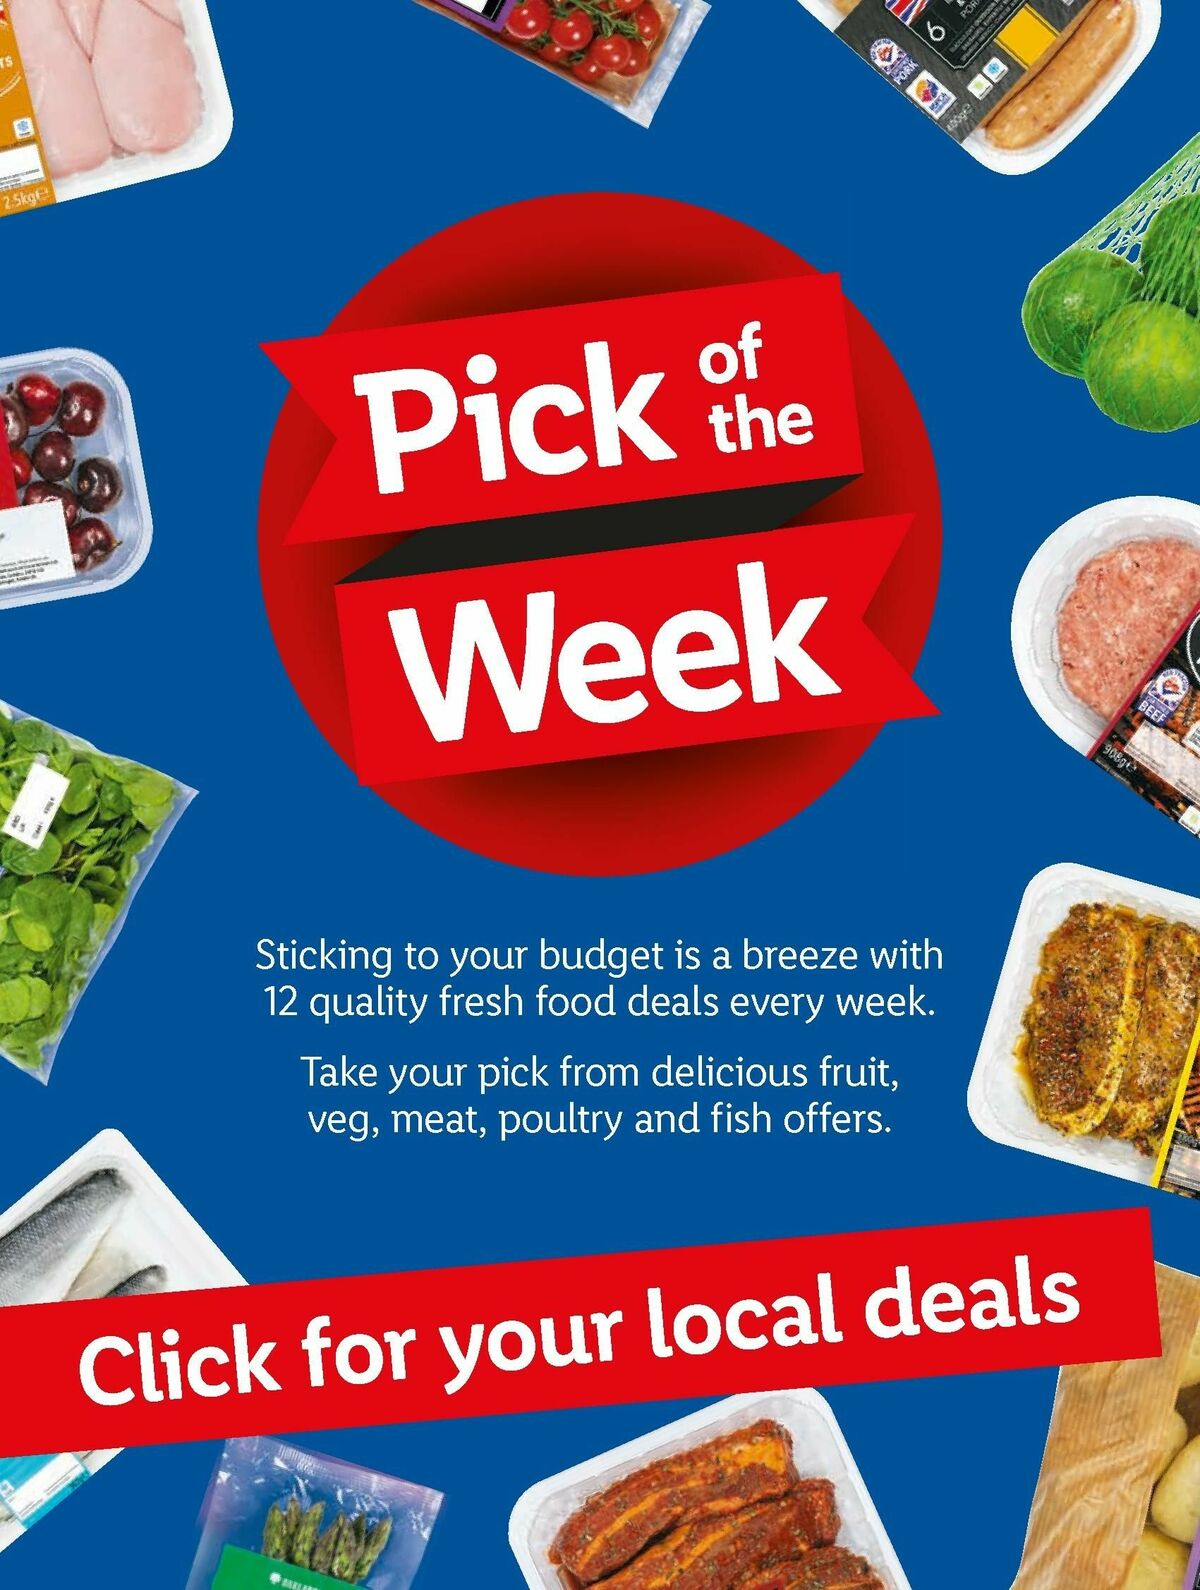 LIDL Offers from 25 January